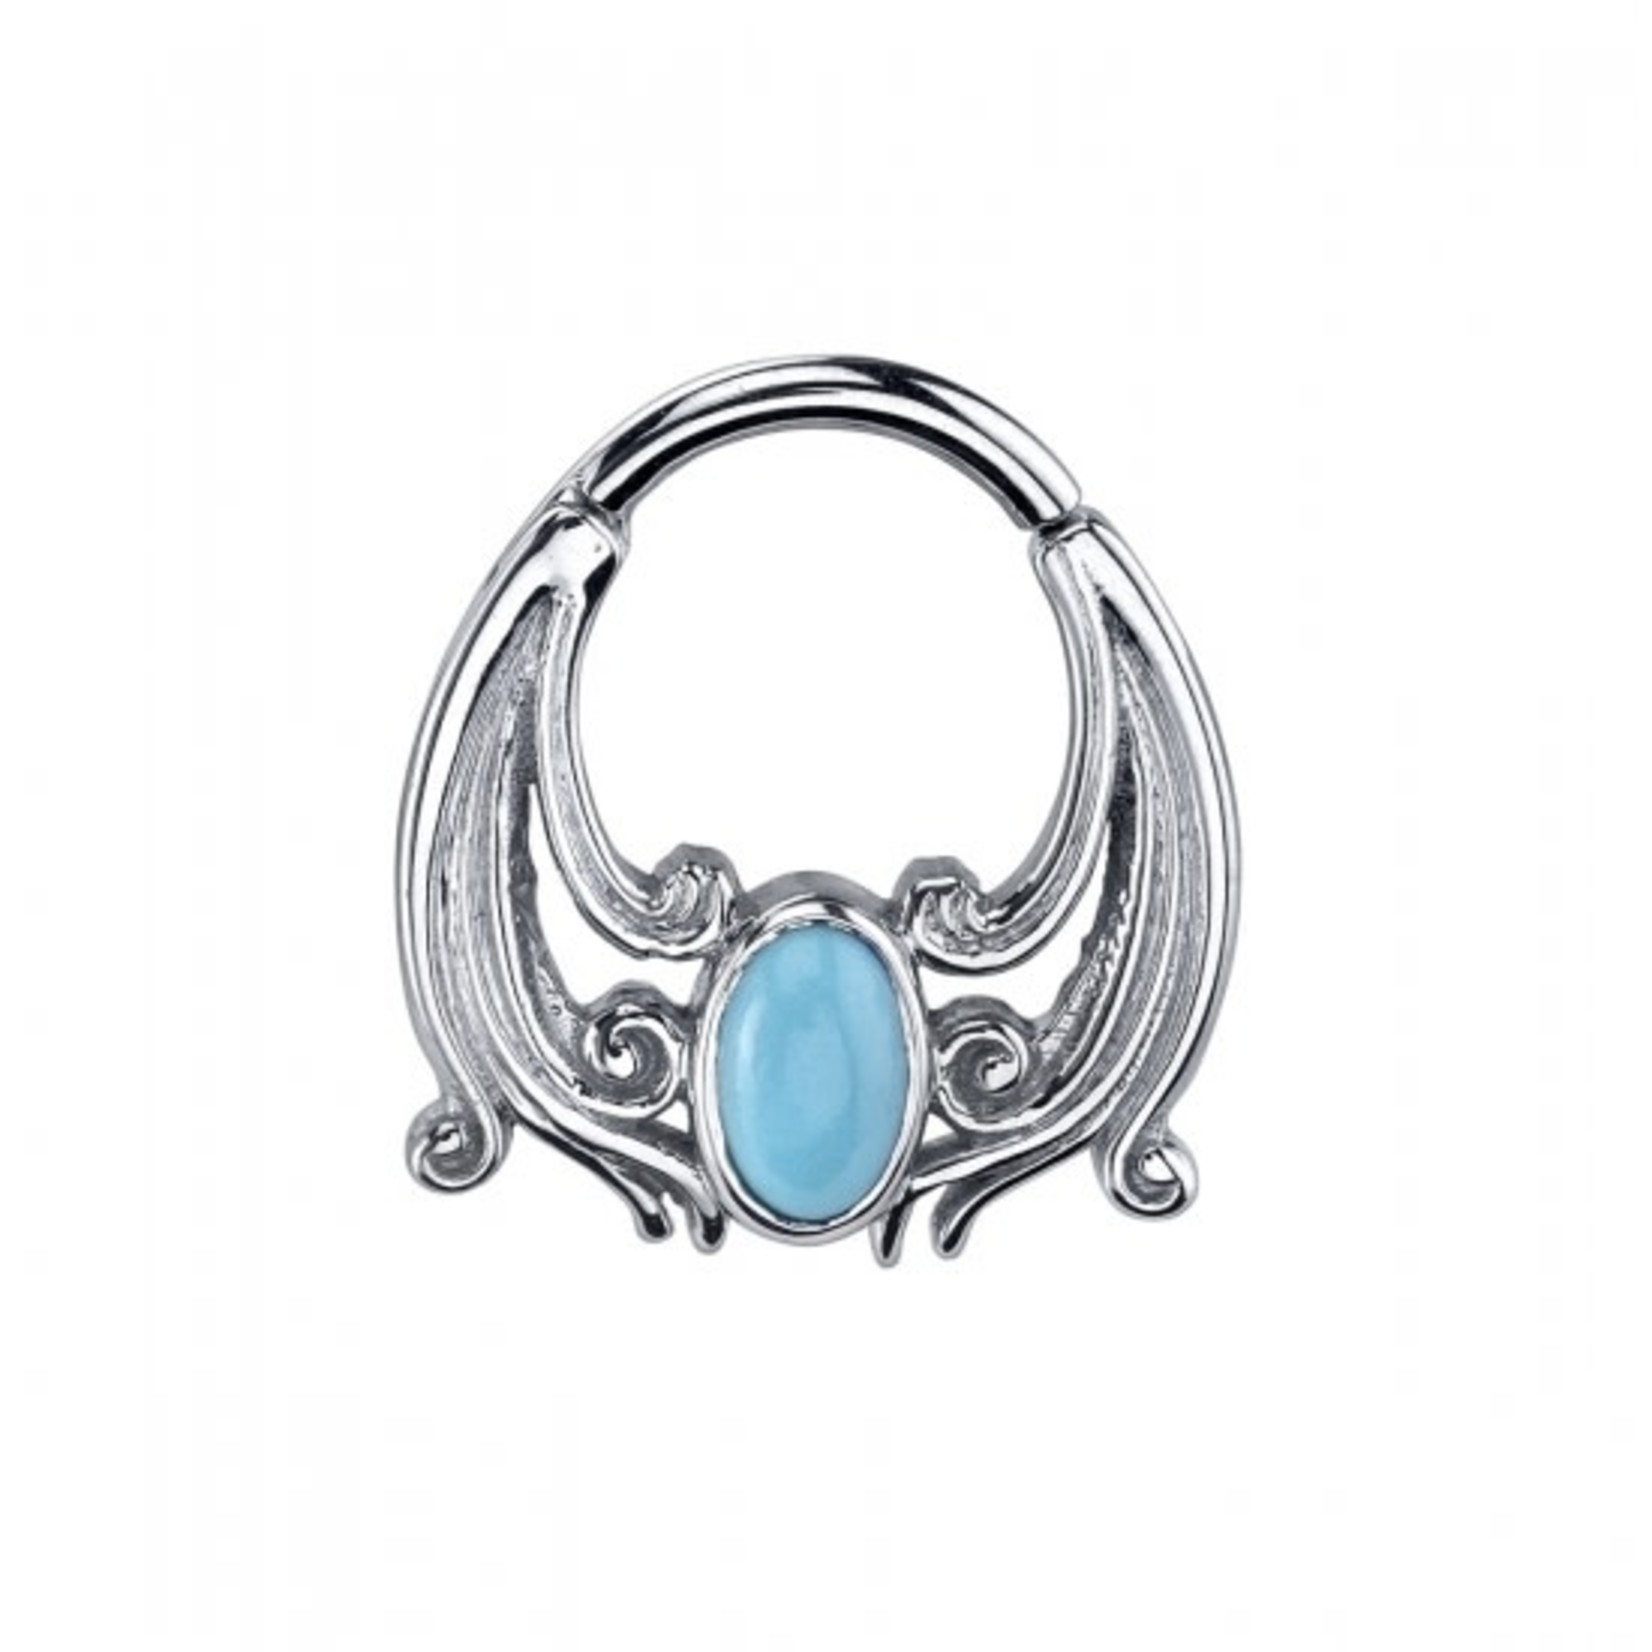 BVLA BVLA 16g 5/16 white gold "Skye" clicker with turquoise oval